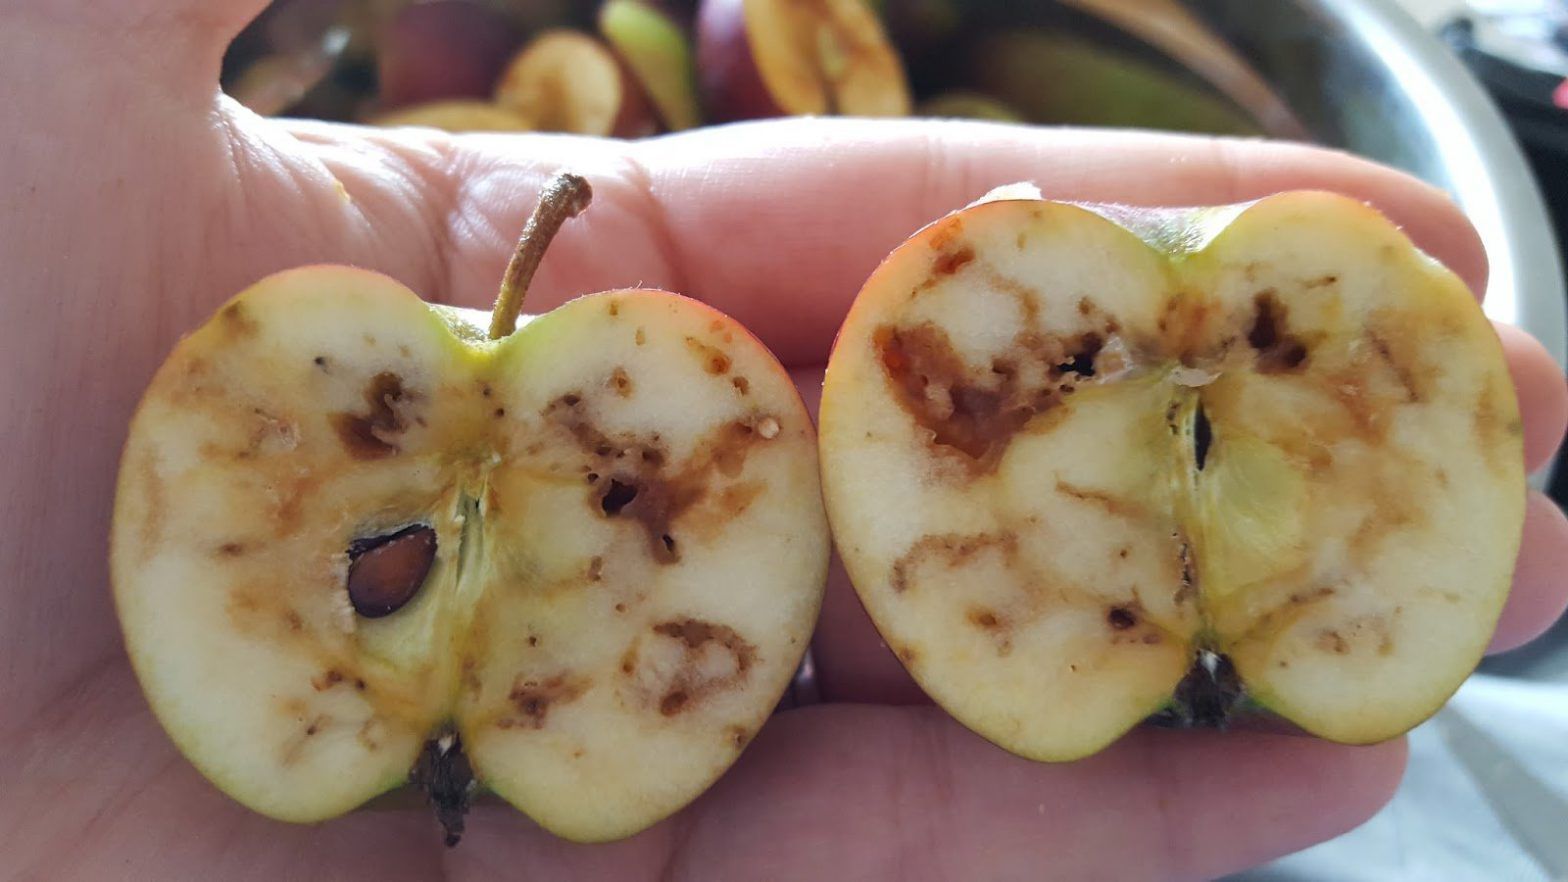 patches of decayed apple flesh due to Apple Maggots